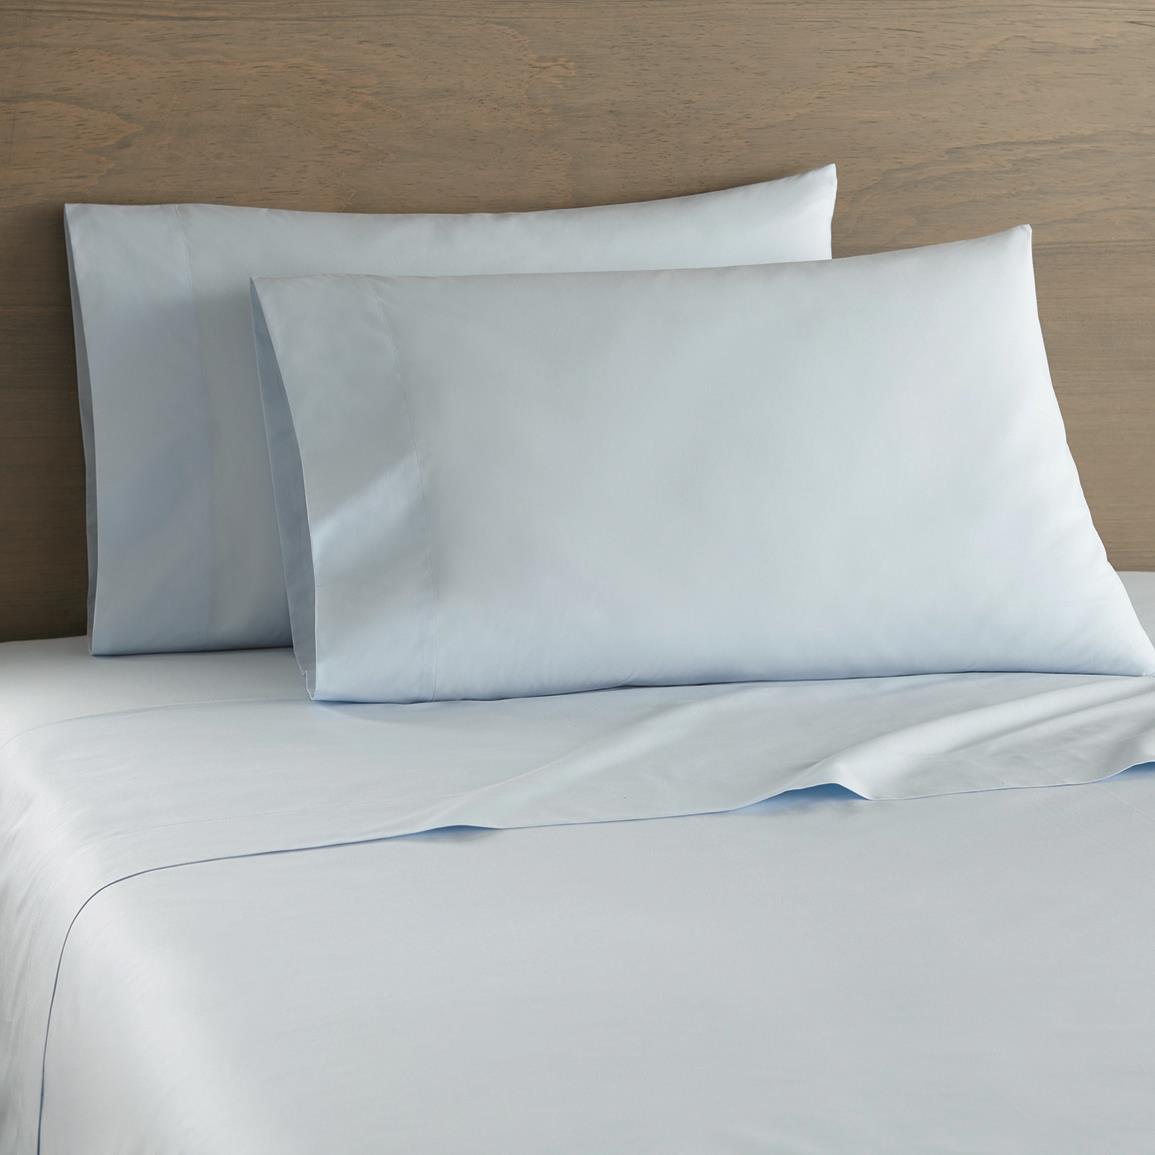 Shavel Home Products Cotton Percale Bed Sheet Set, Nantucket Blue